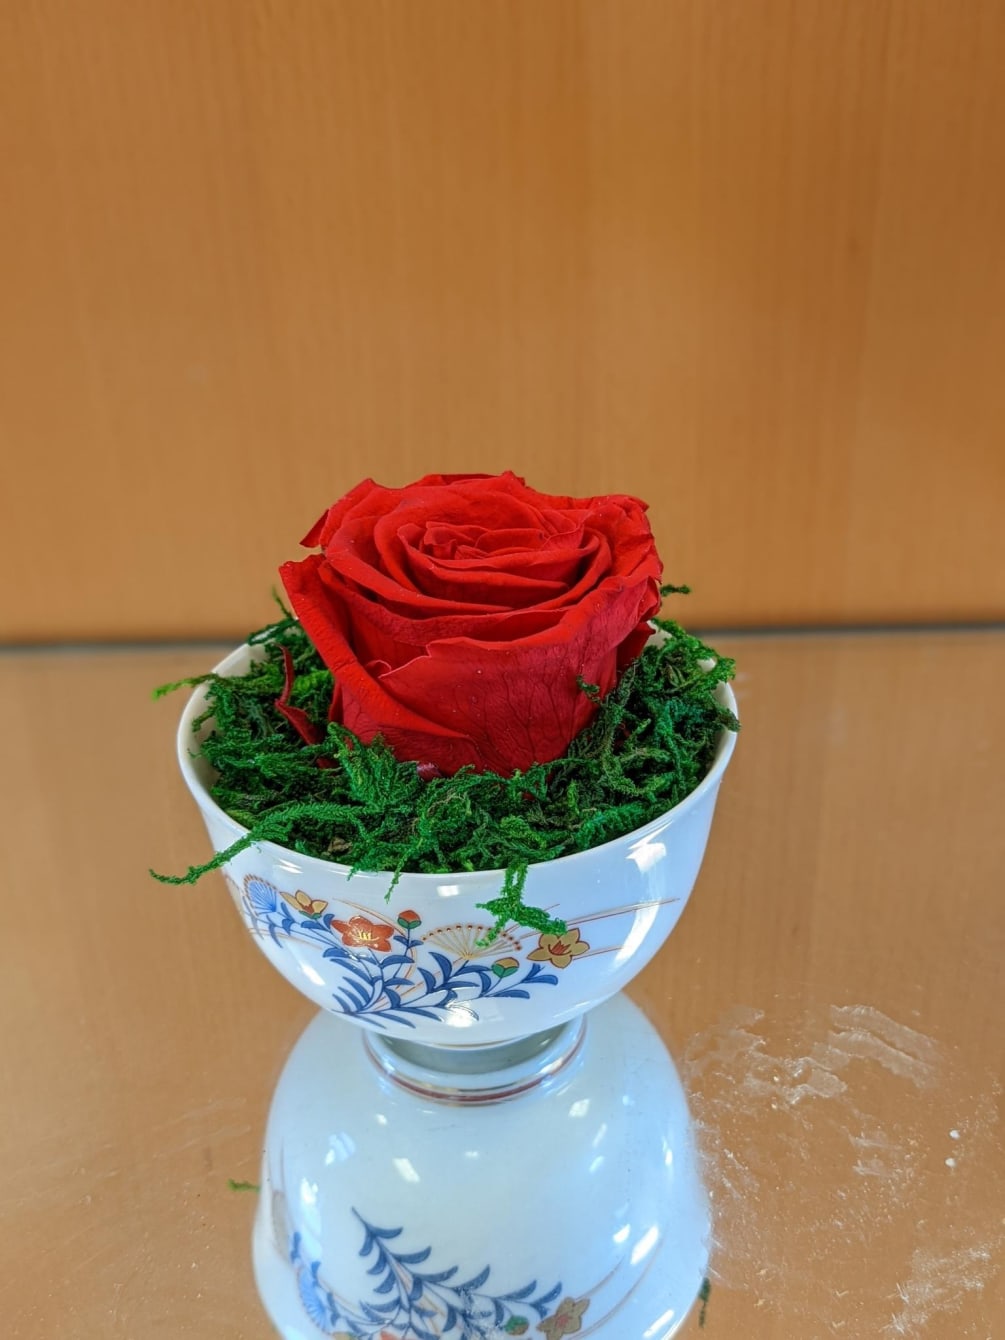 Single preserved rose artfully arranged in a teacup with moss or sand